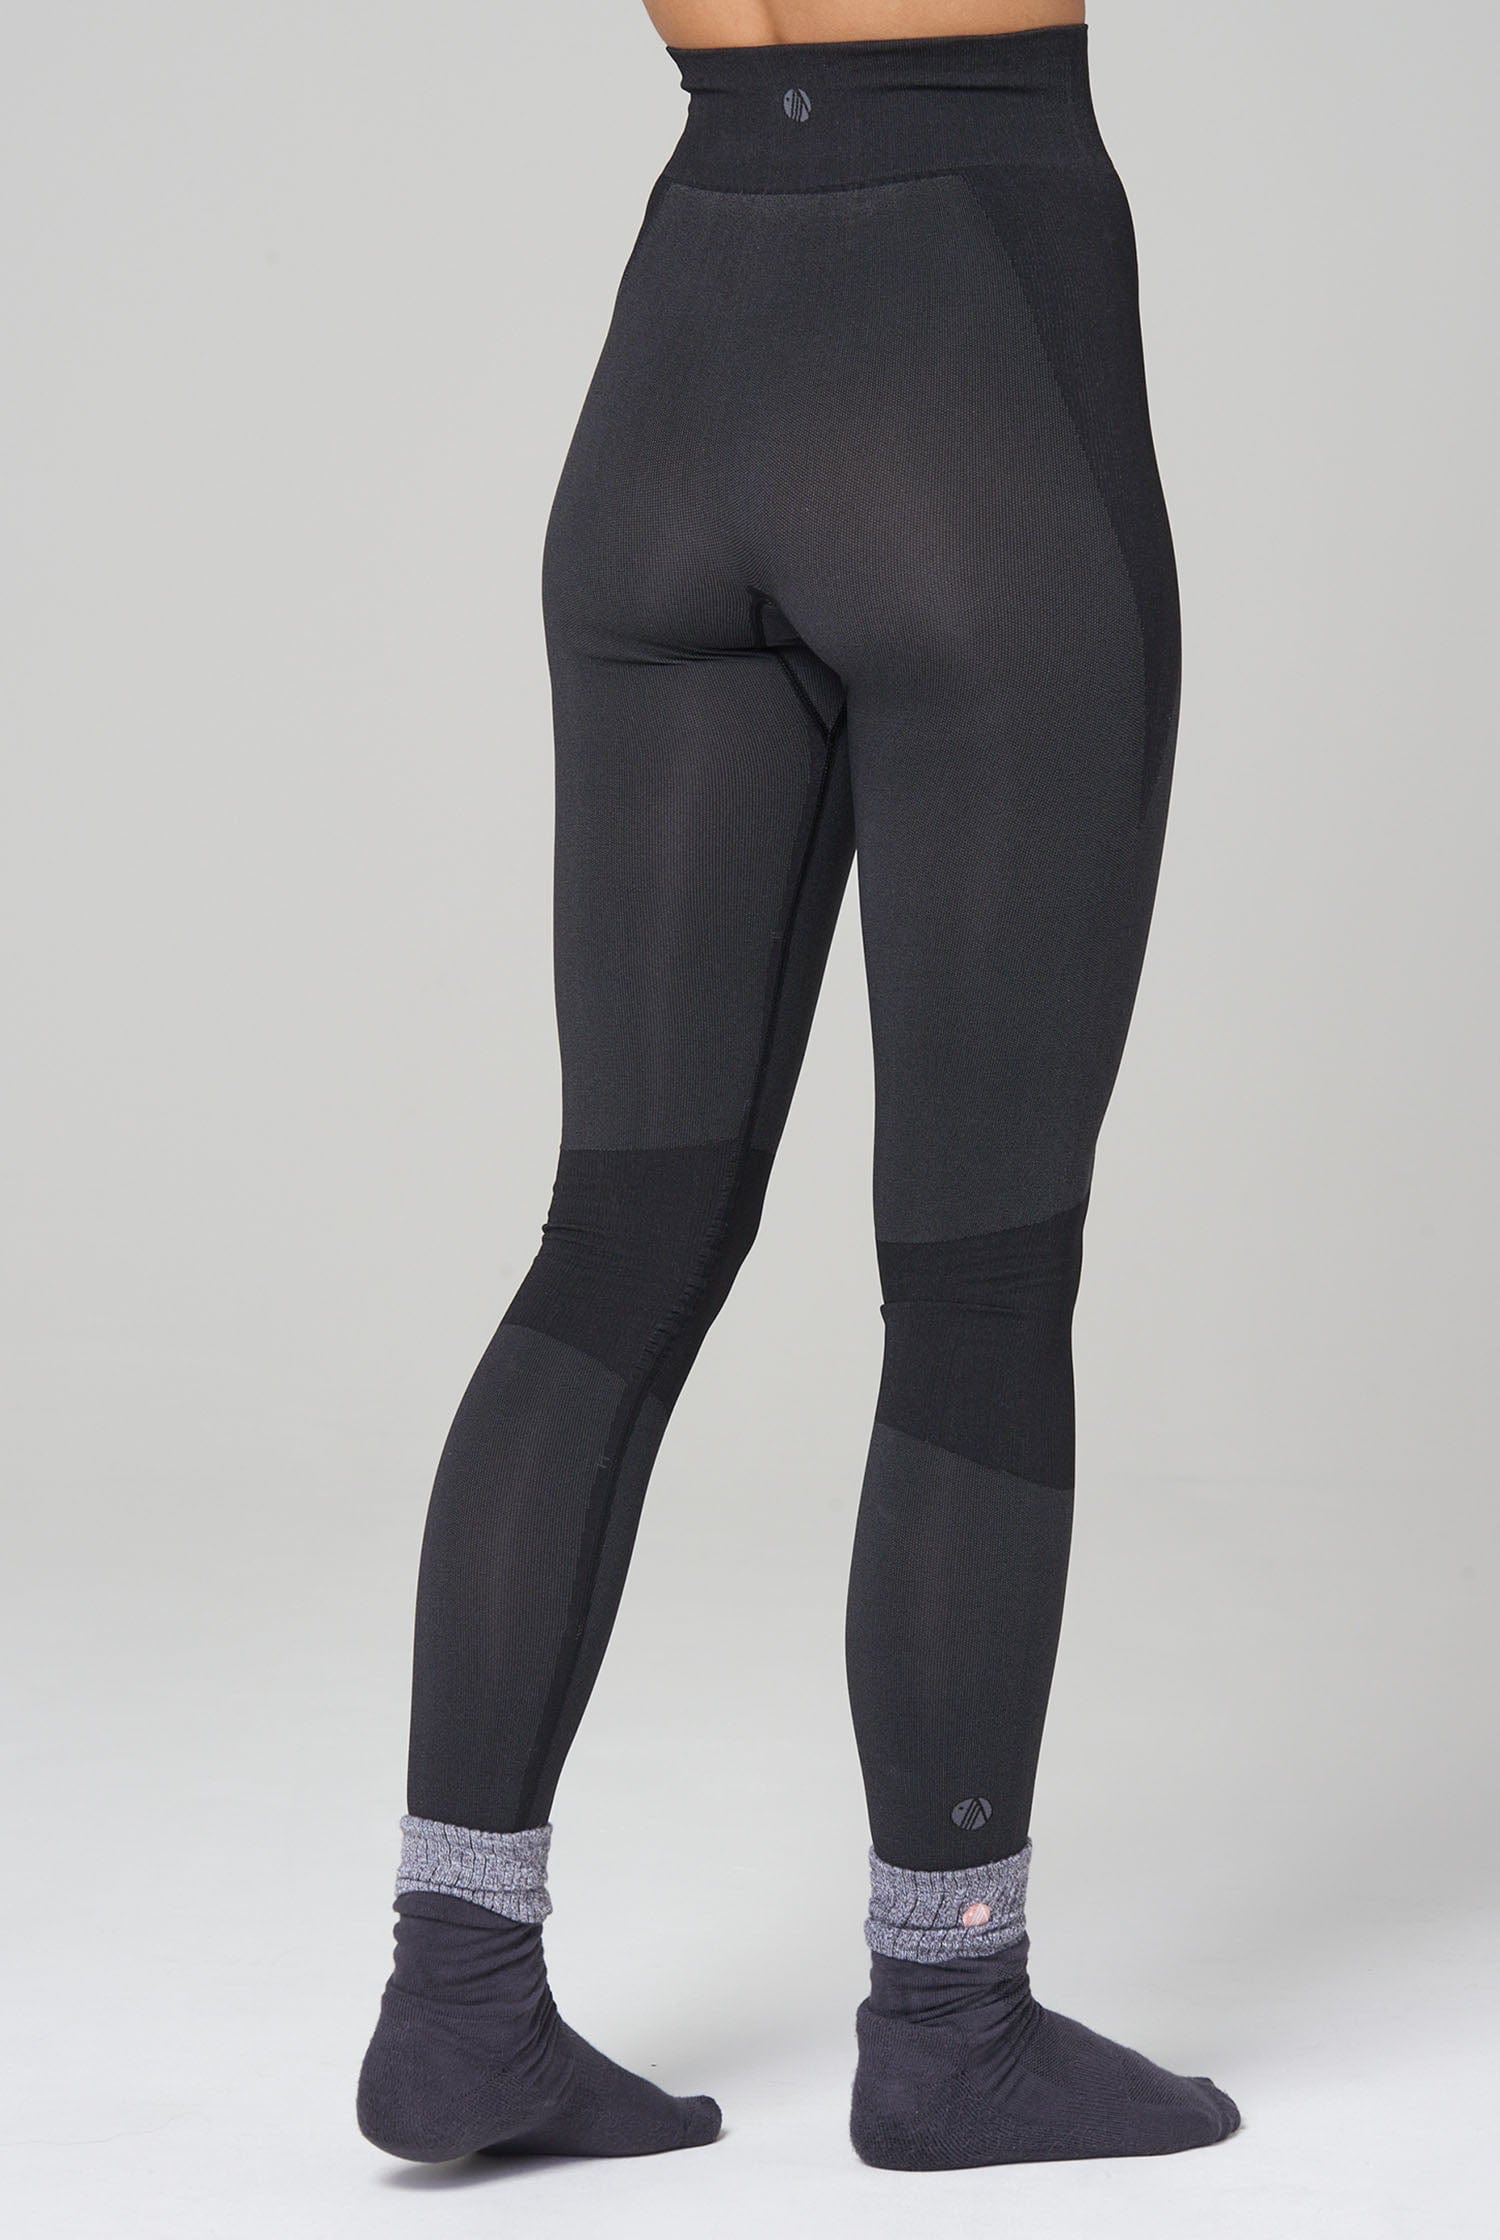 Ladies Compression Suit Thermal Base Layer Tights Shirt Under Long